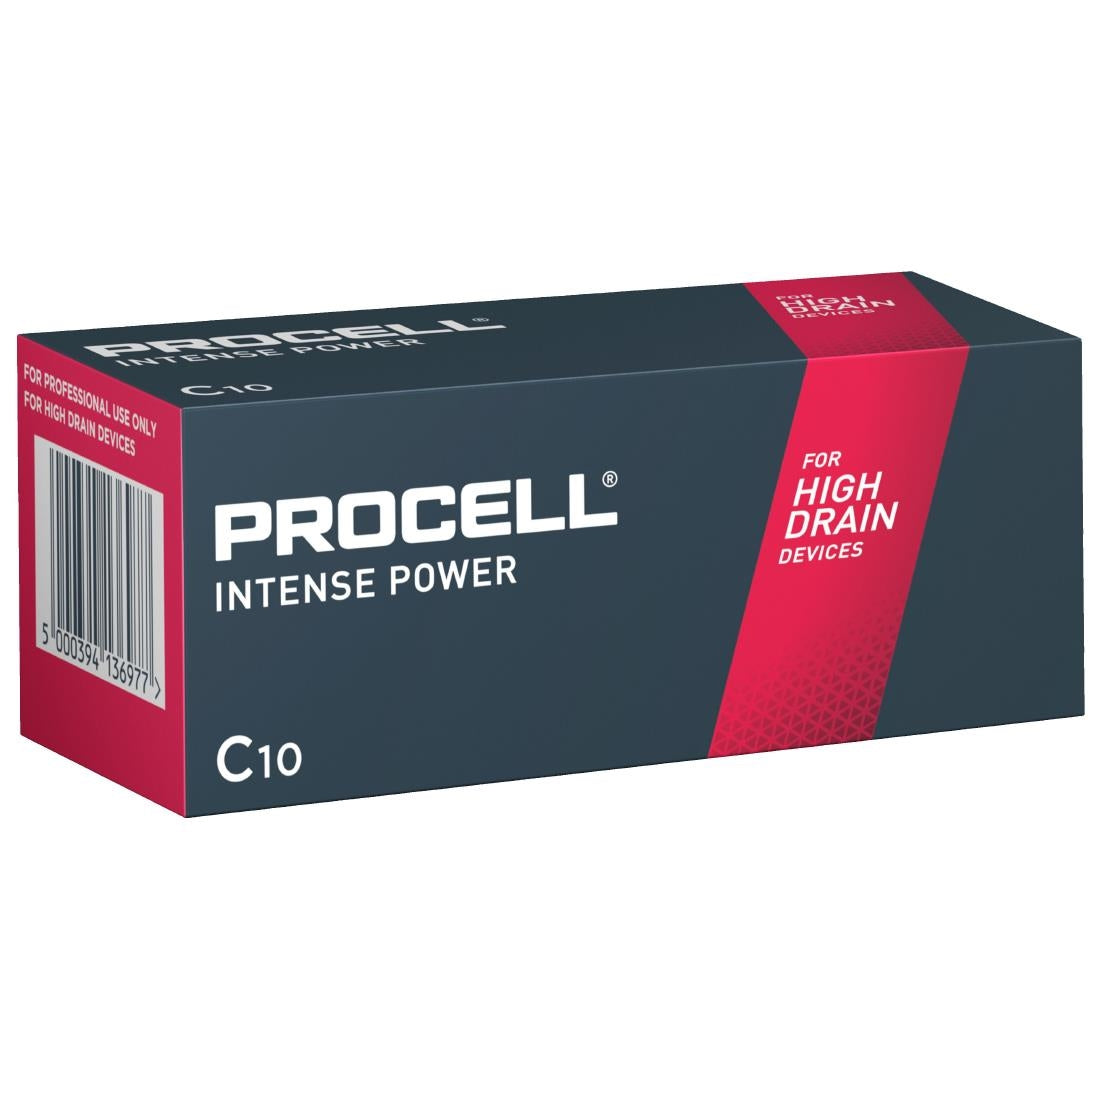 FS723 Duracell Procell Intense C Battery (Pack of 10) JD Catering Equipment Solutions Ltd